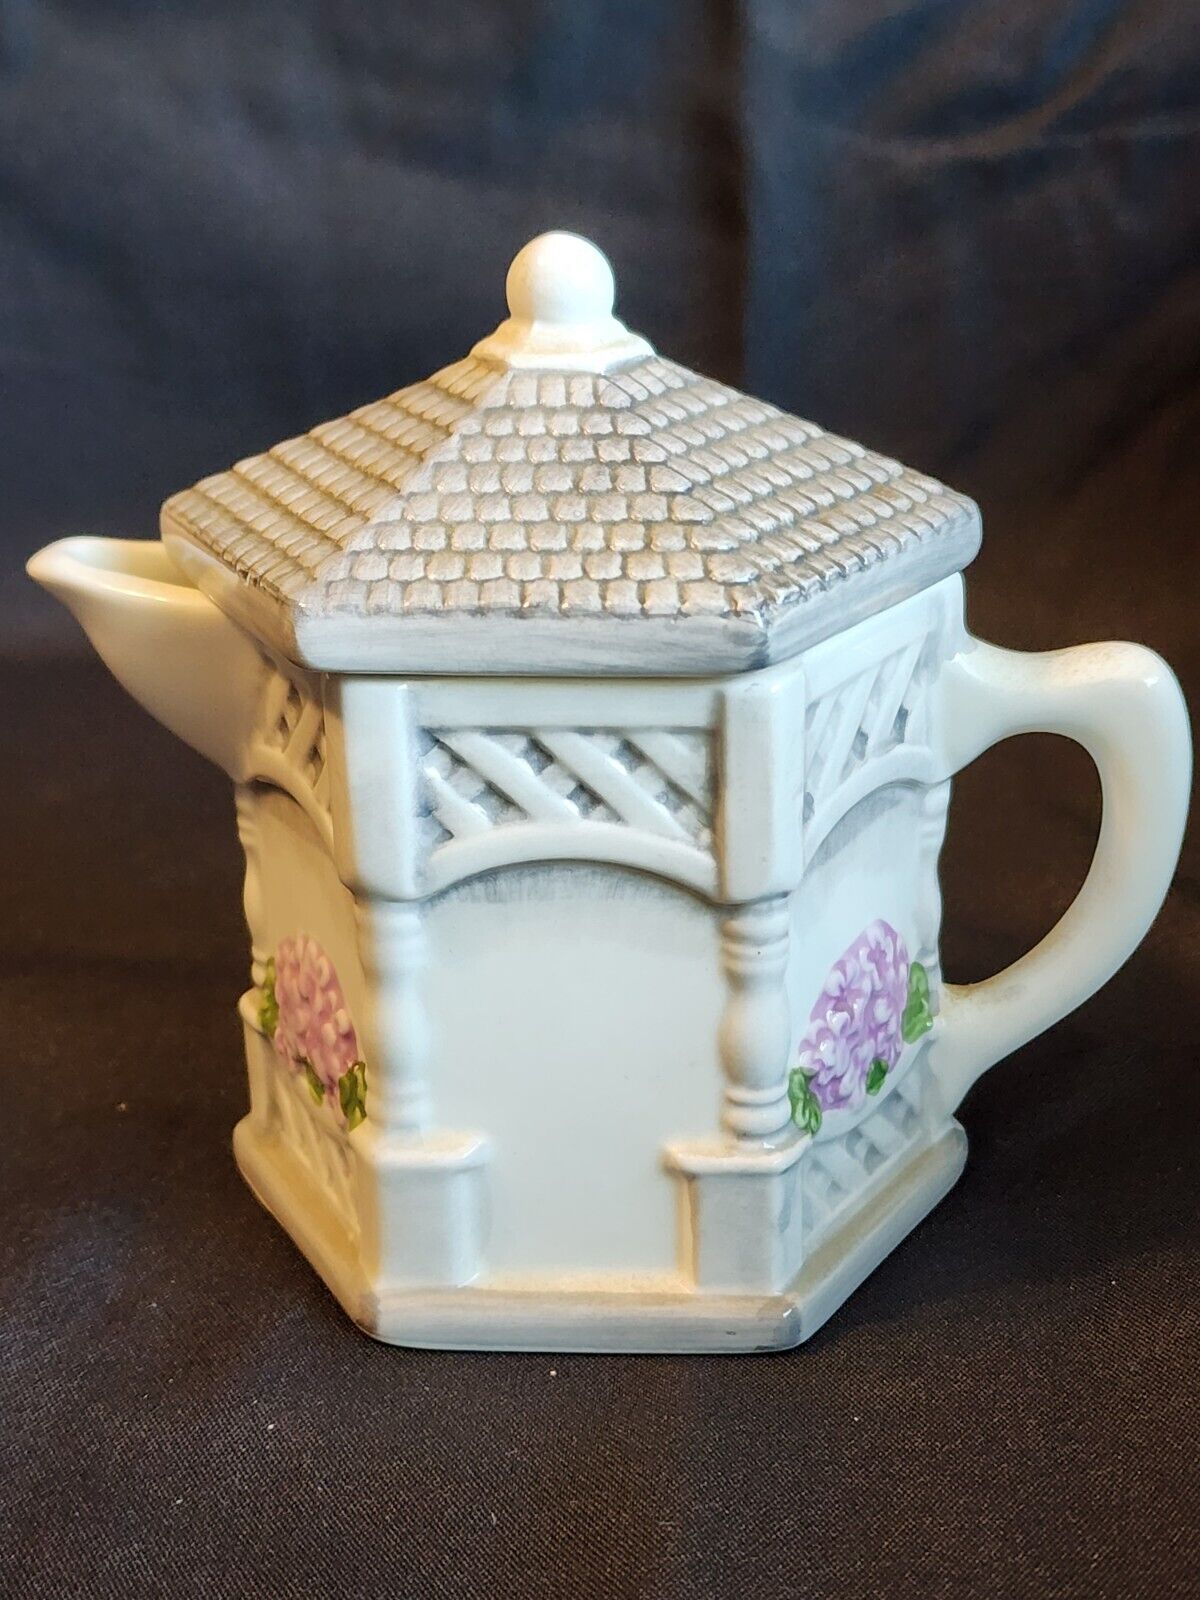 English Garden Miniature Tea and Coffee Pots With Lids Ceramic Floral Gazebo 5”